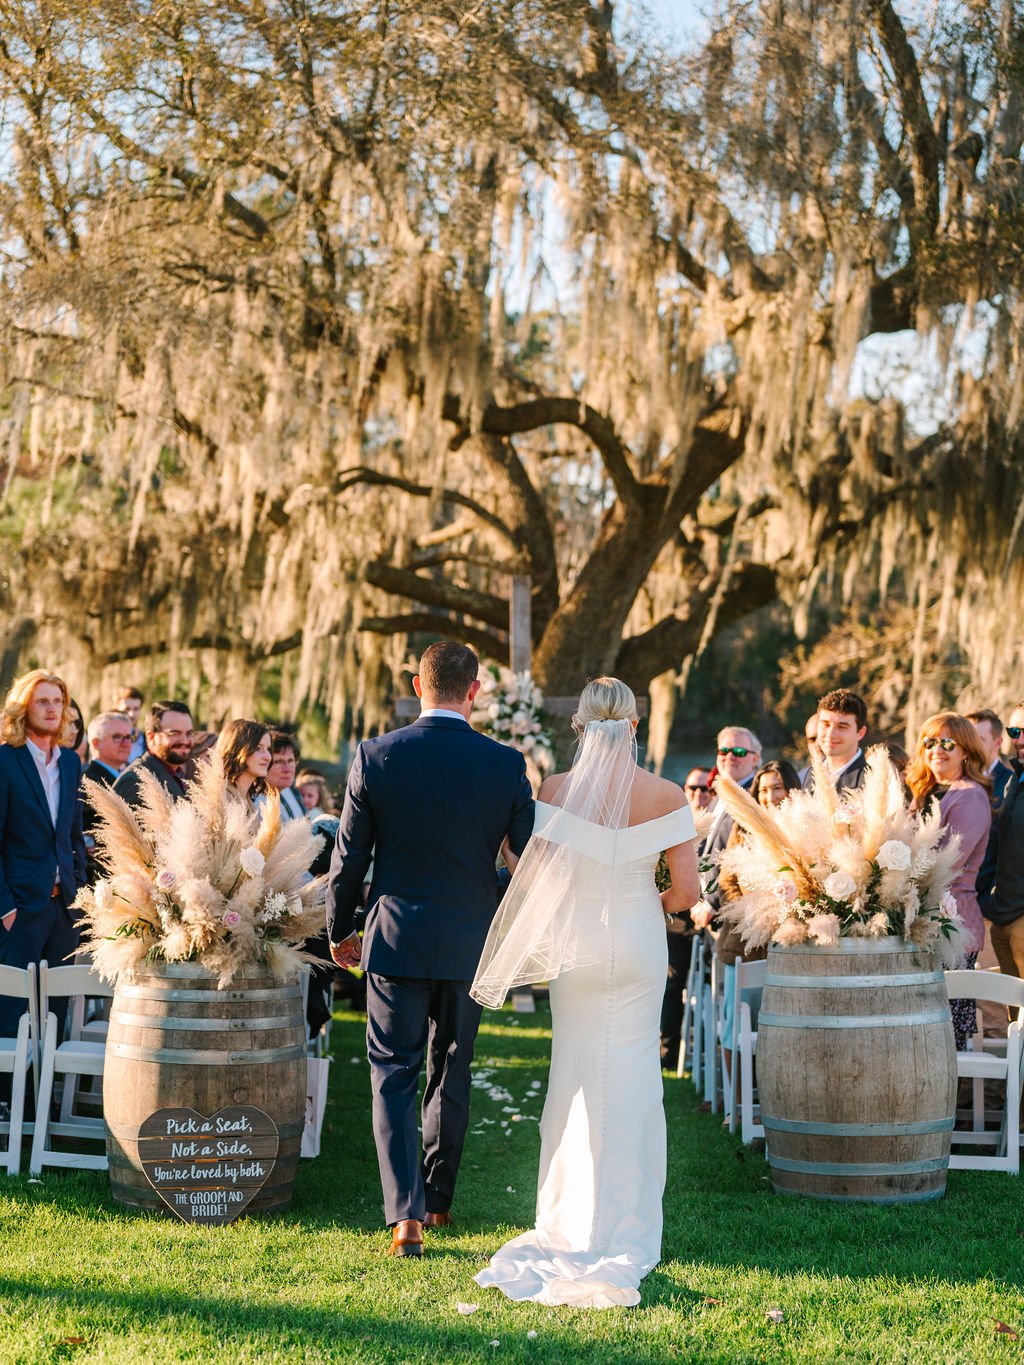 delaney-and-joshuas-real-savannah-wedding-at-red-gate-farms-planned-by-savannah-wedding-planner-ivory-and-beau-with-wedding-florals-from-savannah-wedding-florist-ivory-and-beau-shot-by-5d-photography-savannah-wedding-savannah-bride-12.jpg